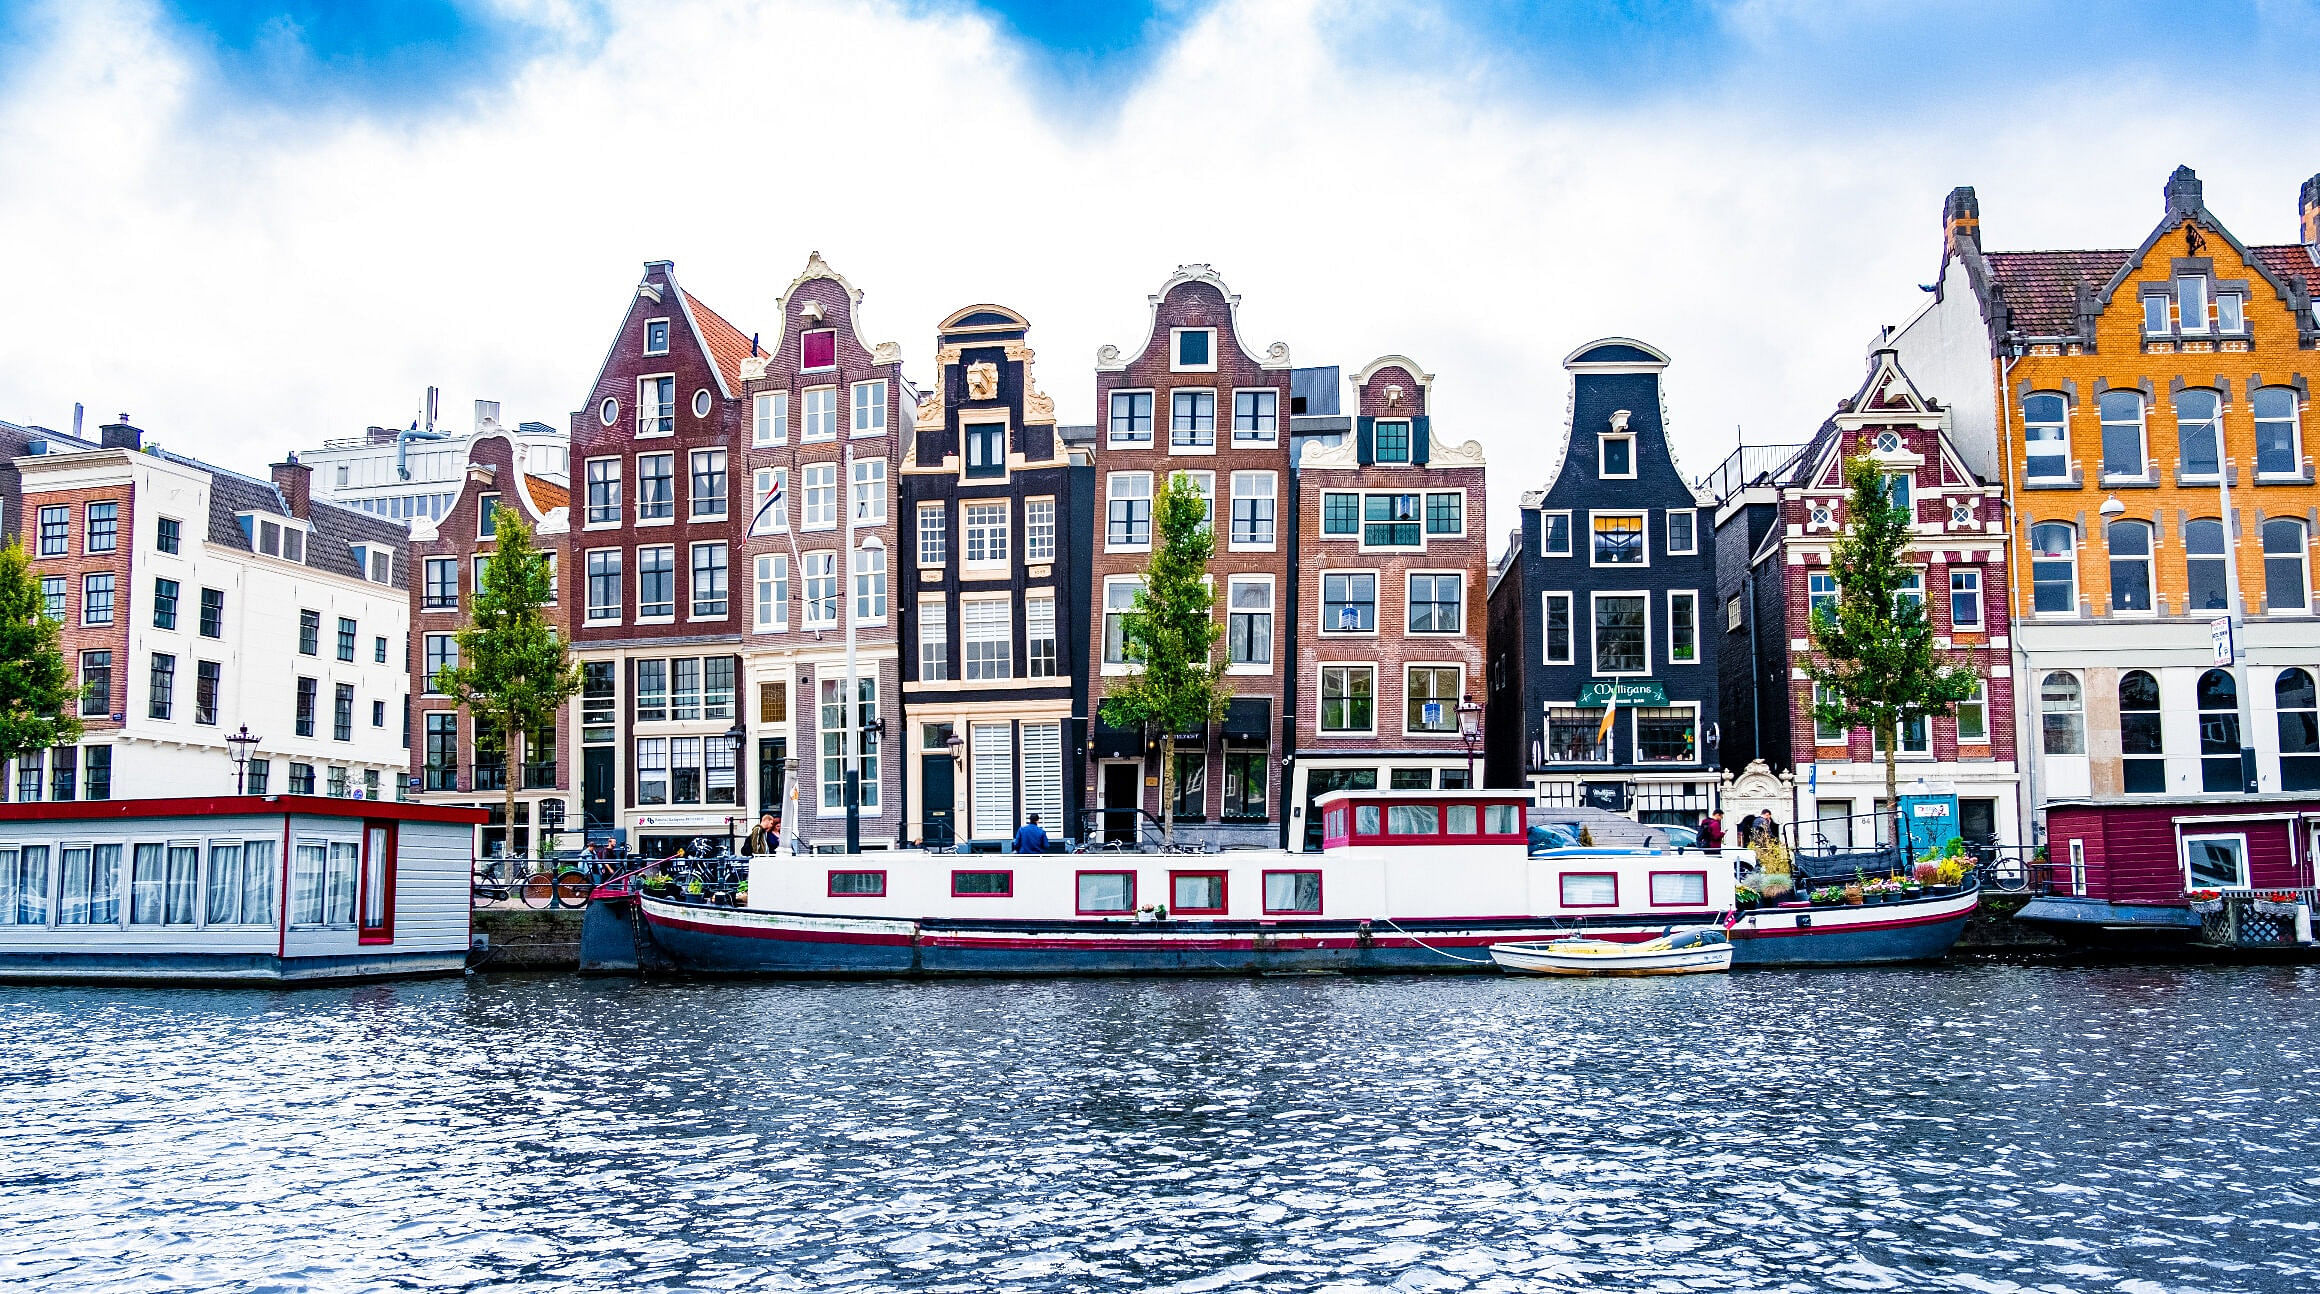 Houses along a canal in Amsterdam